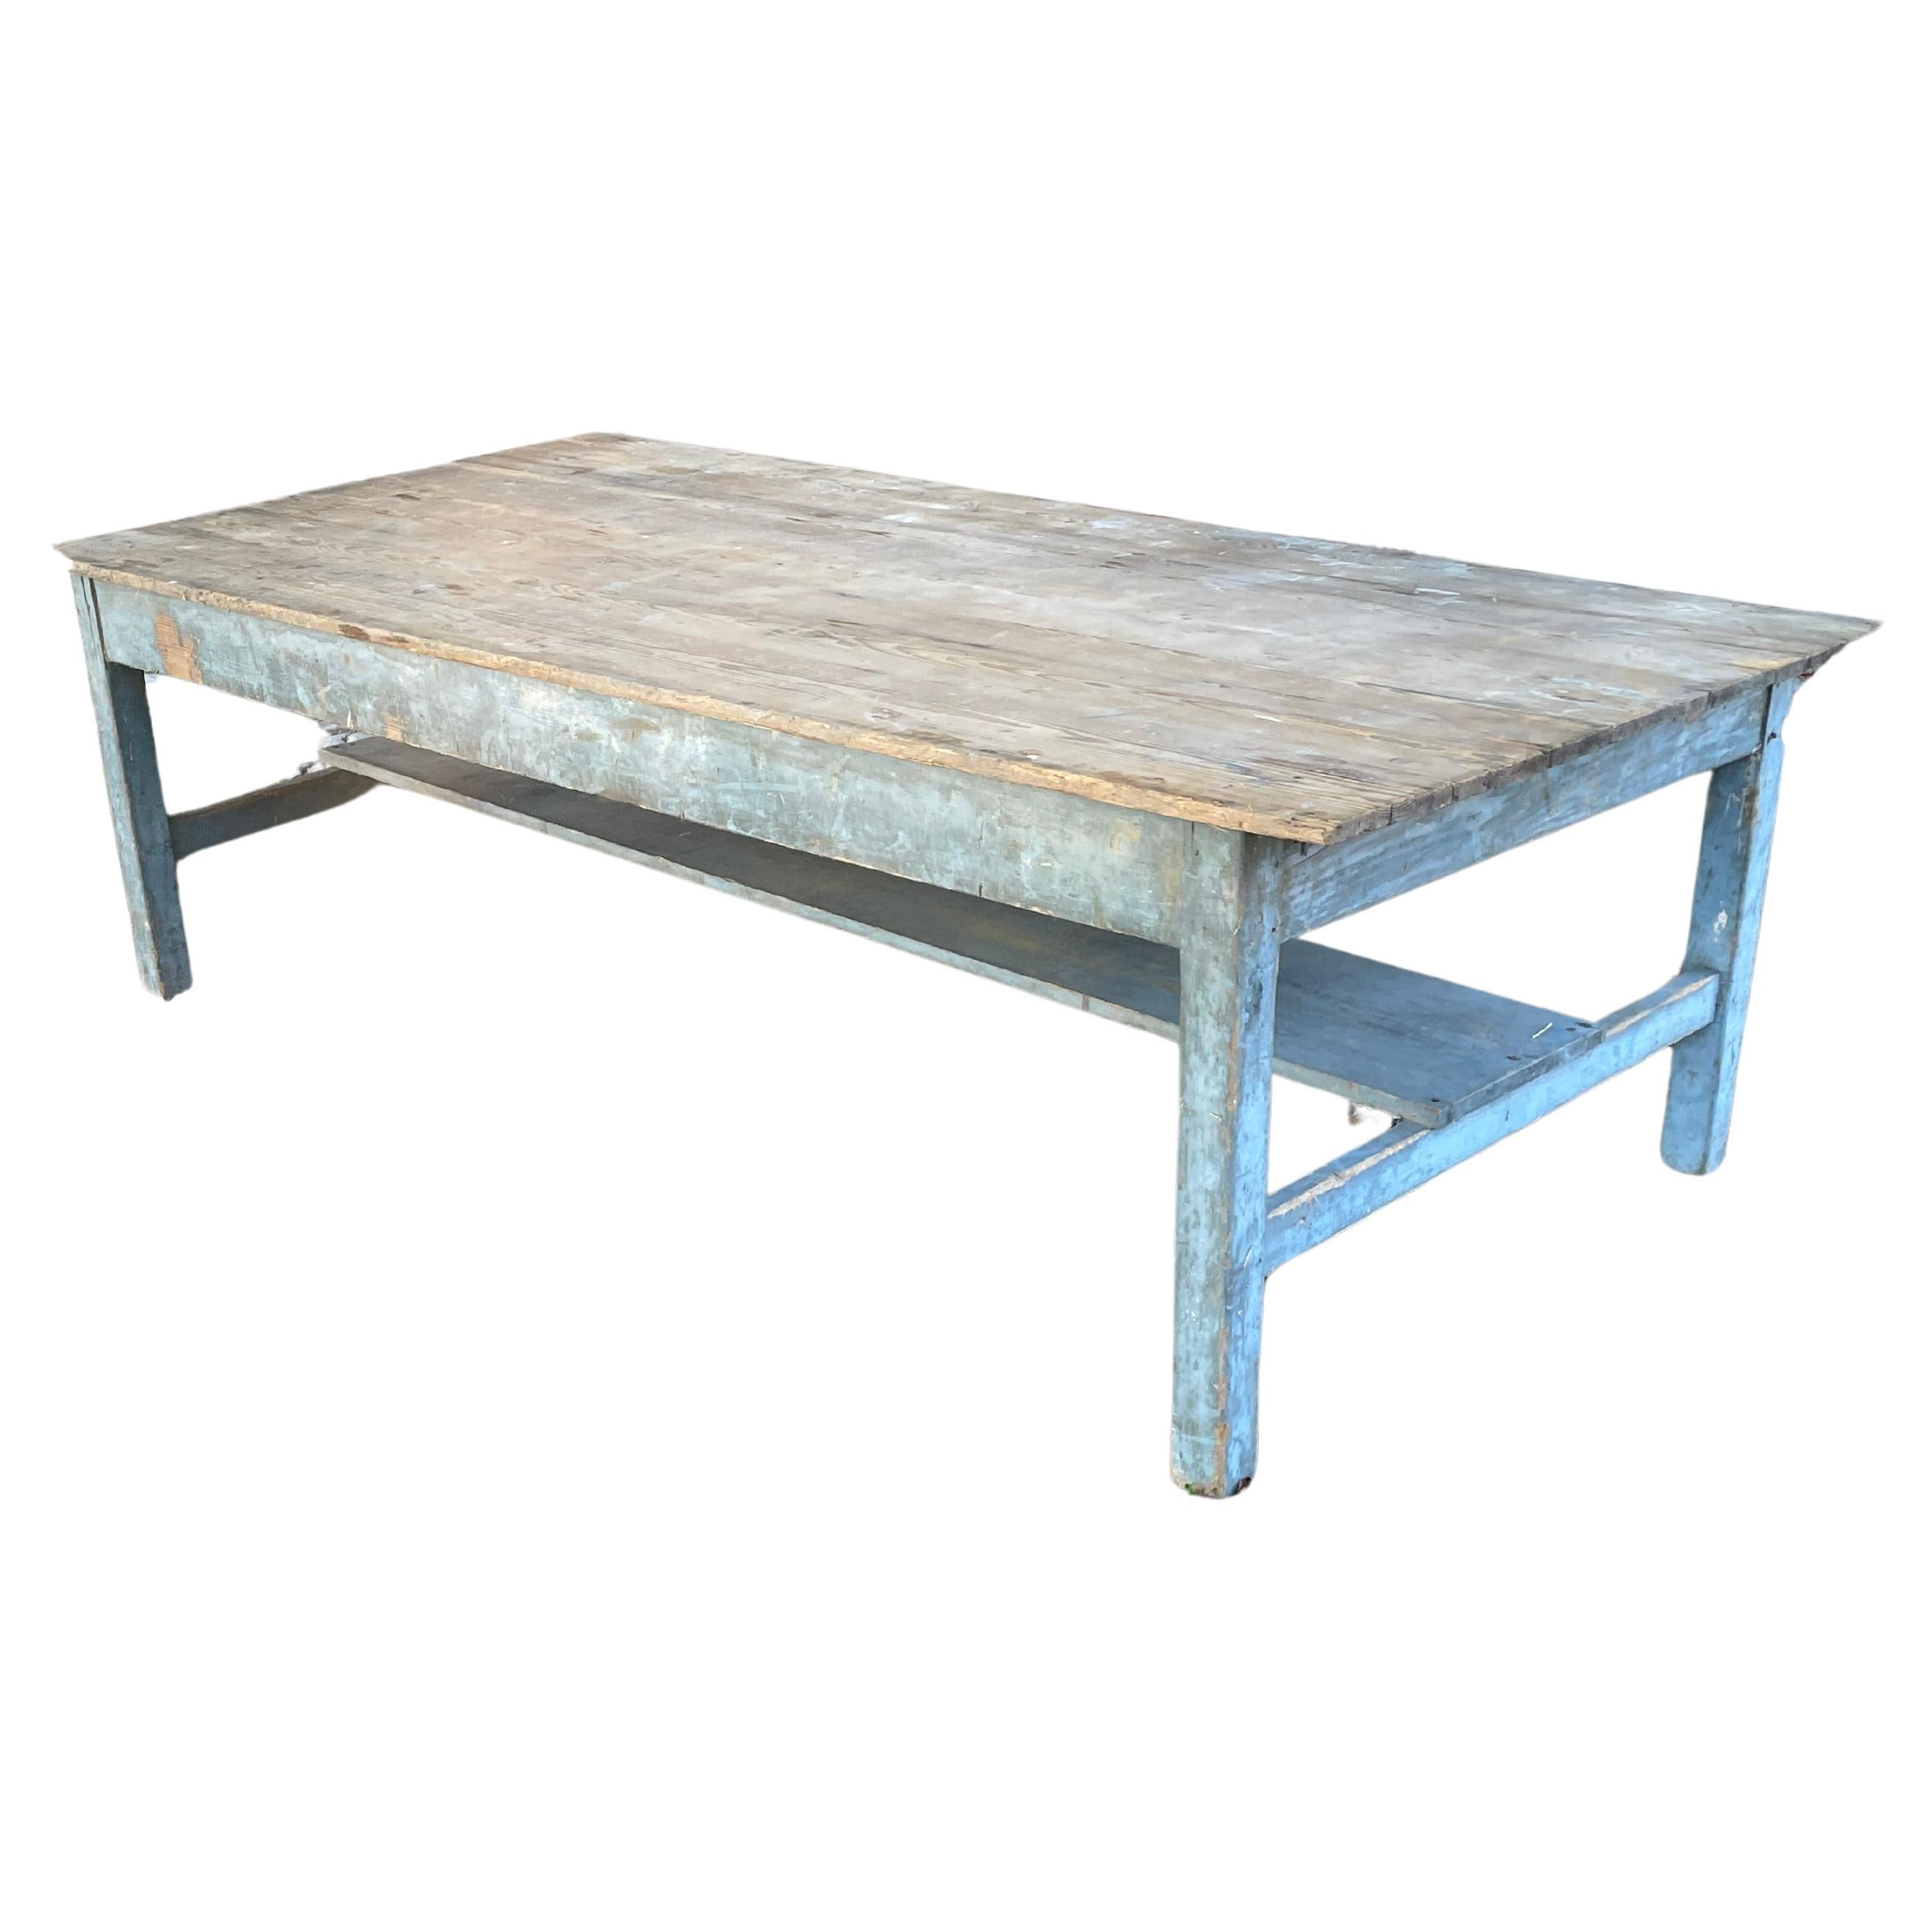 Large and wide old farm table For Sale